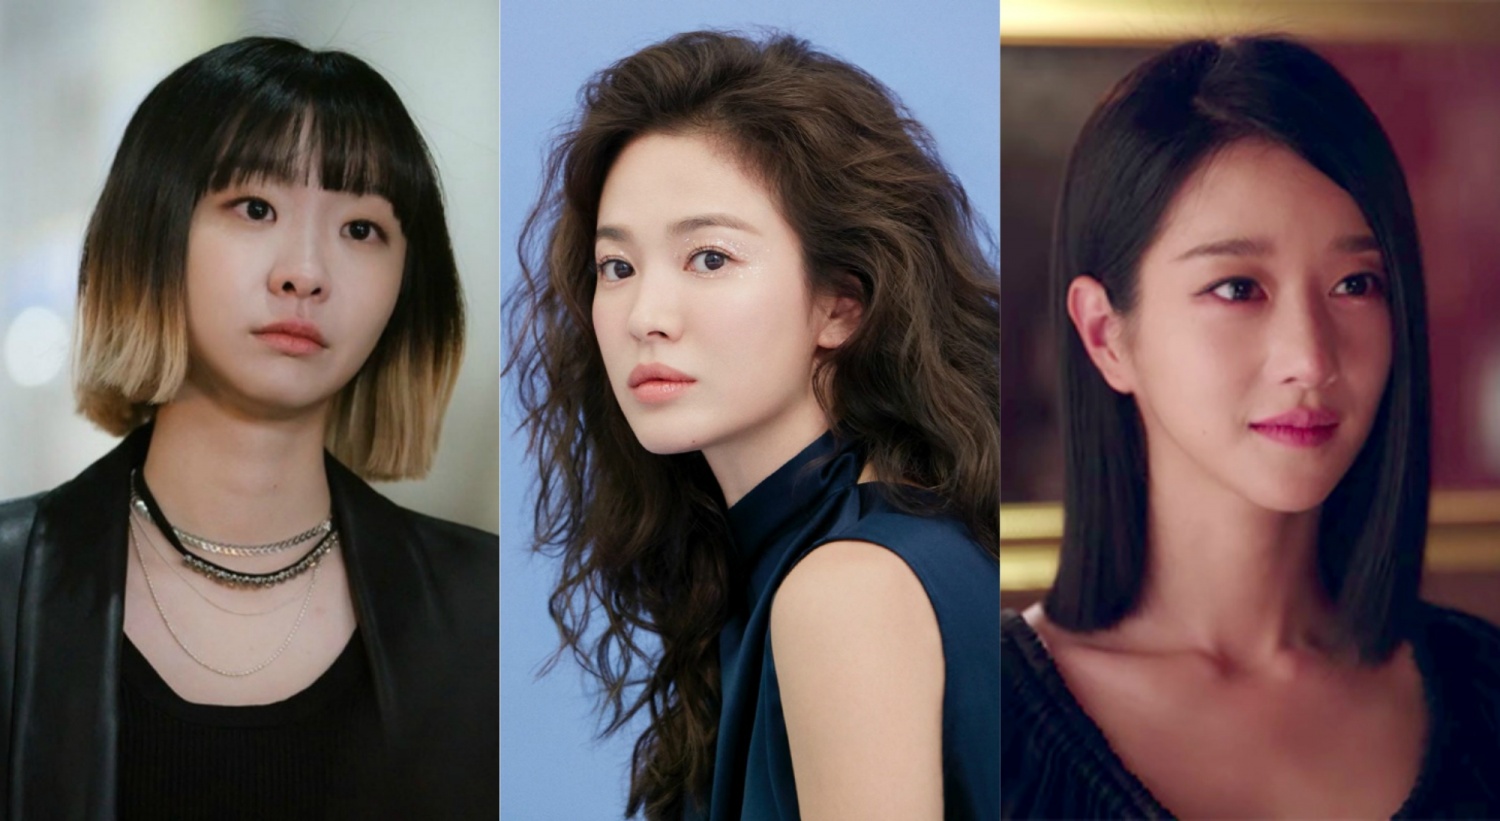 6 Korean Actresses And Their Hairstyles To Try For A Change While In  Quarantine | KDramaStars